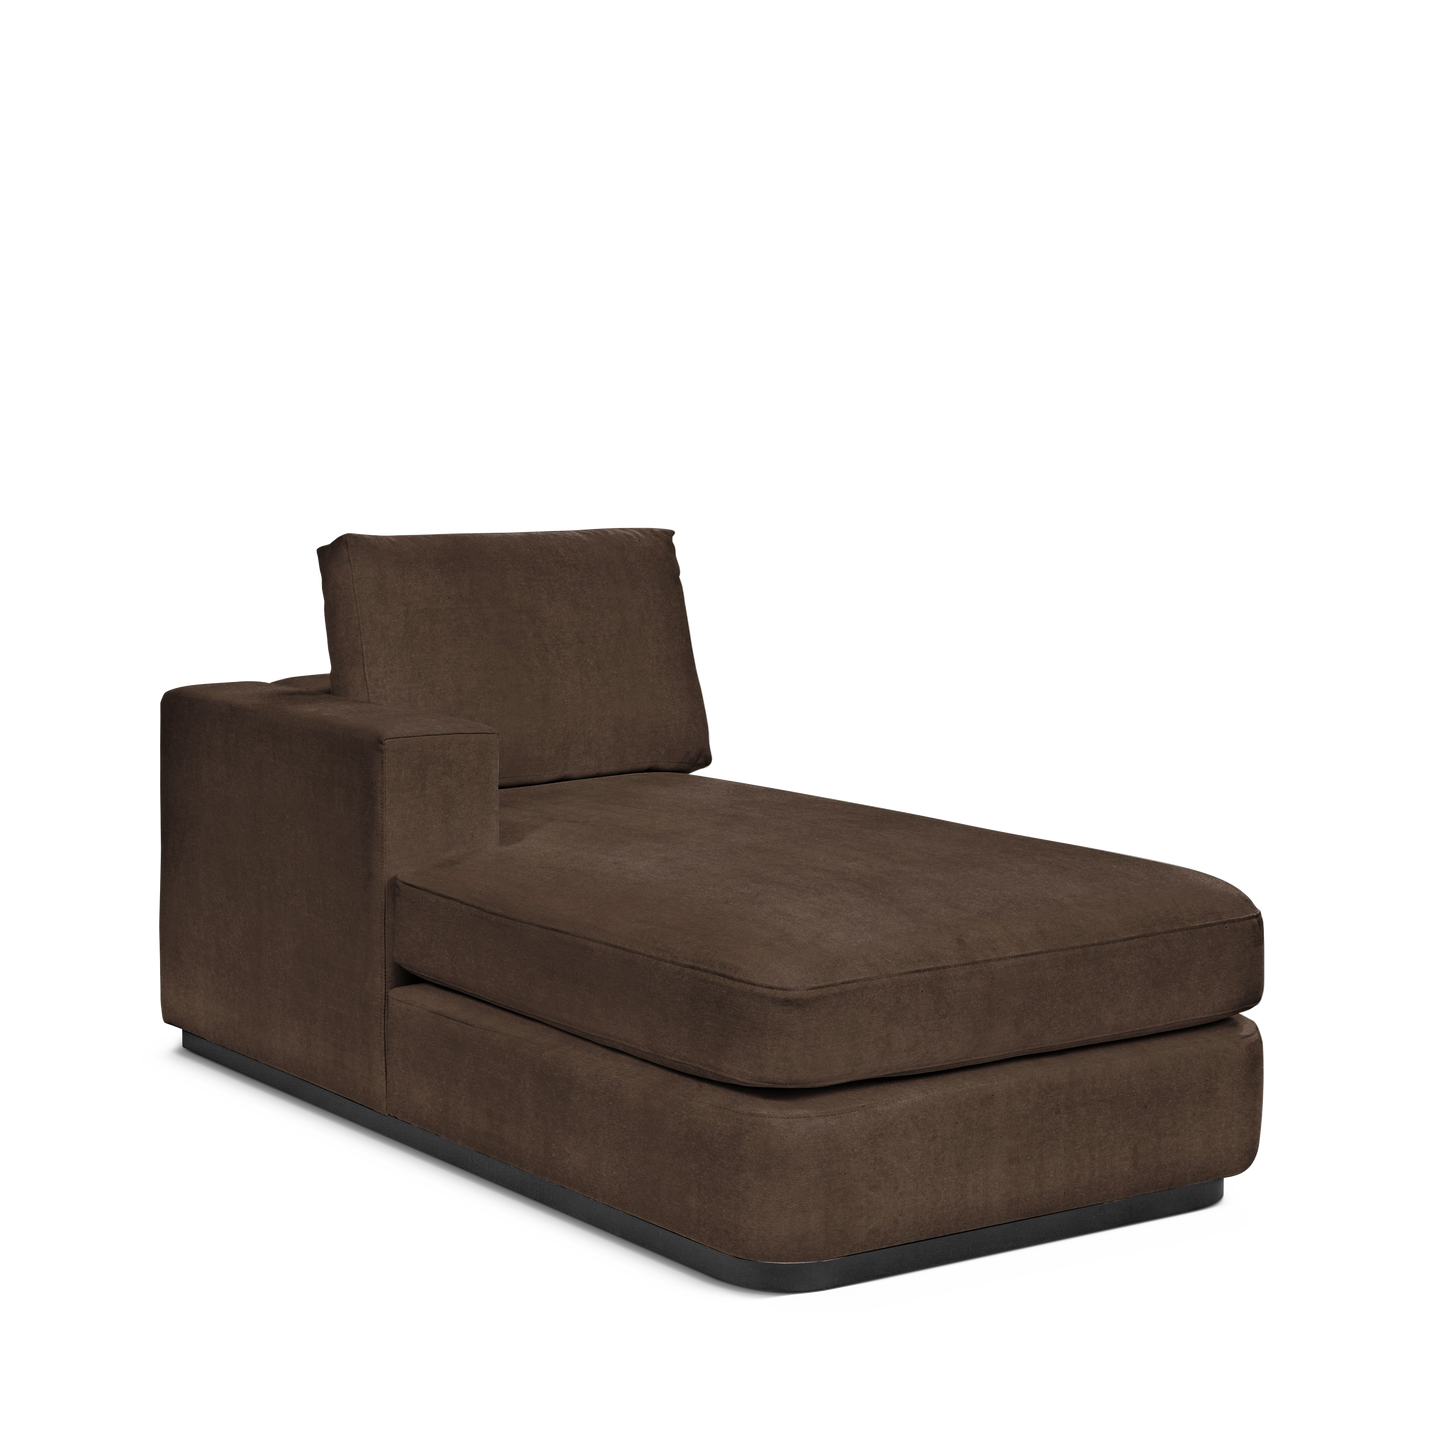 ATLAS 90 Lounge Bed arm rest left with suede brown textile